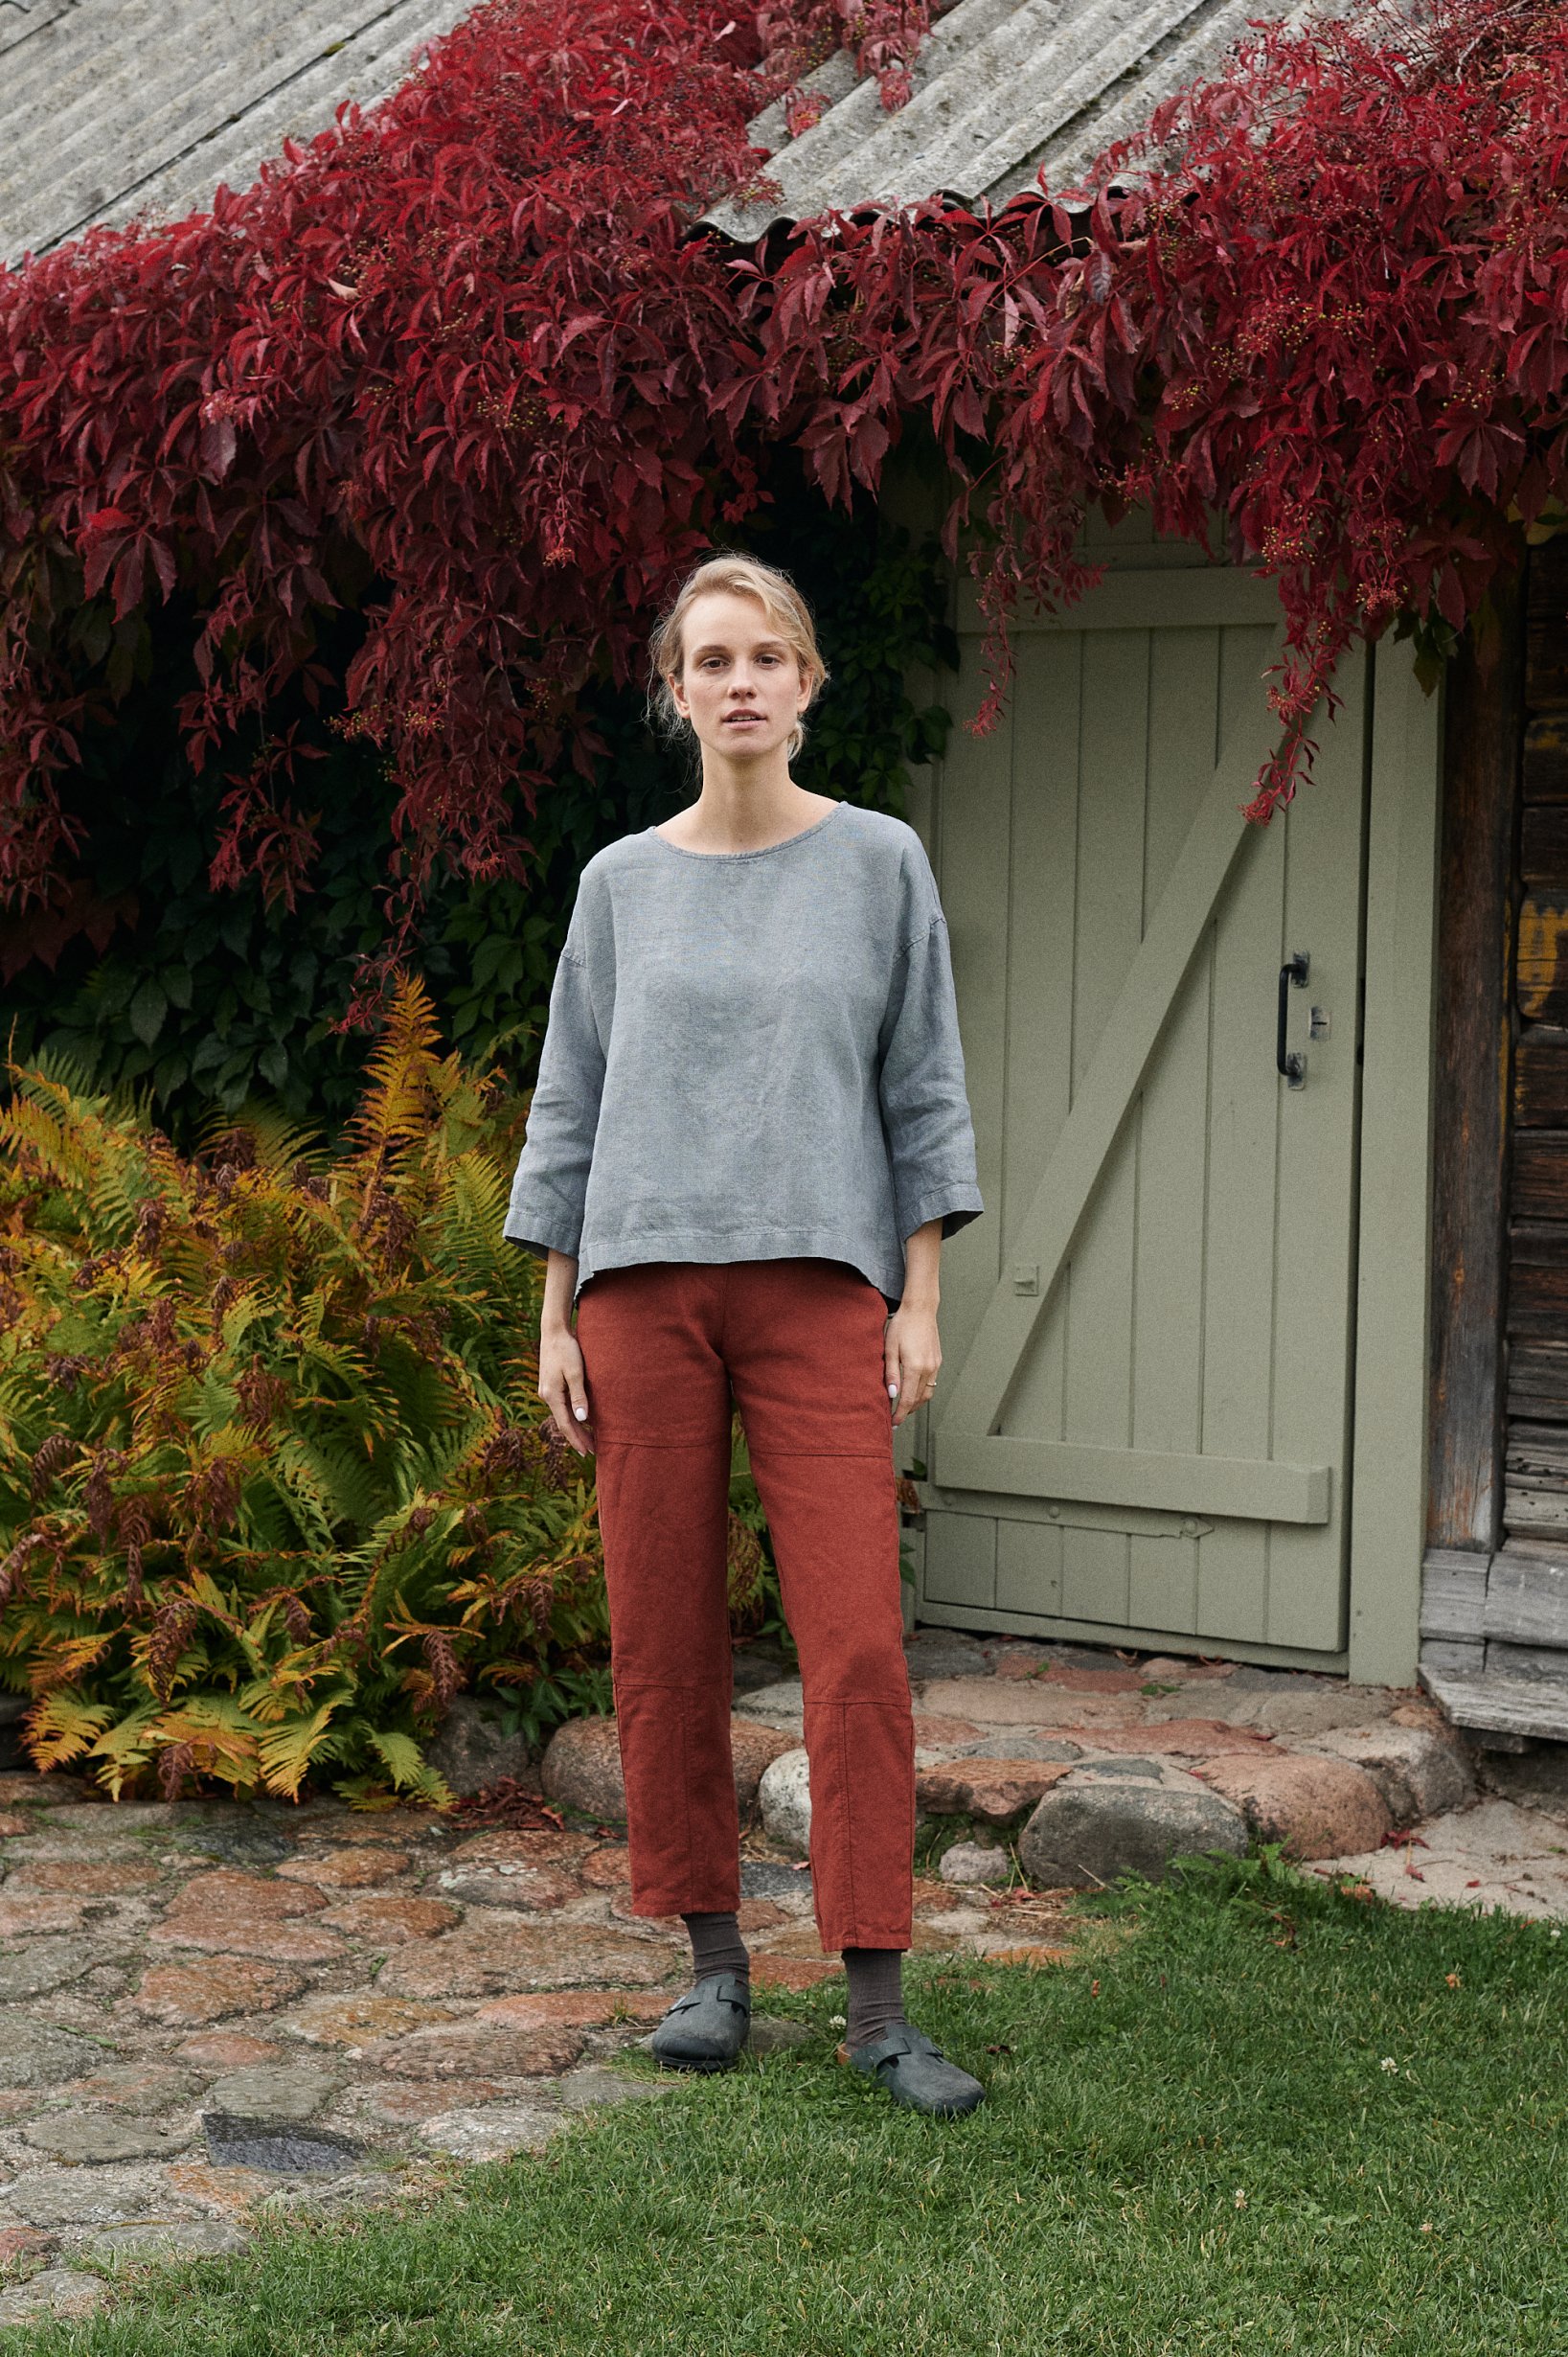 High-waisted utility trousers and a loose-fitting linen top